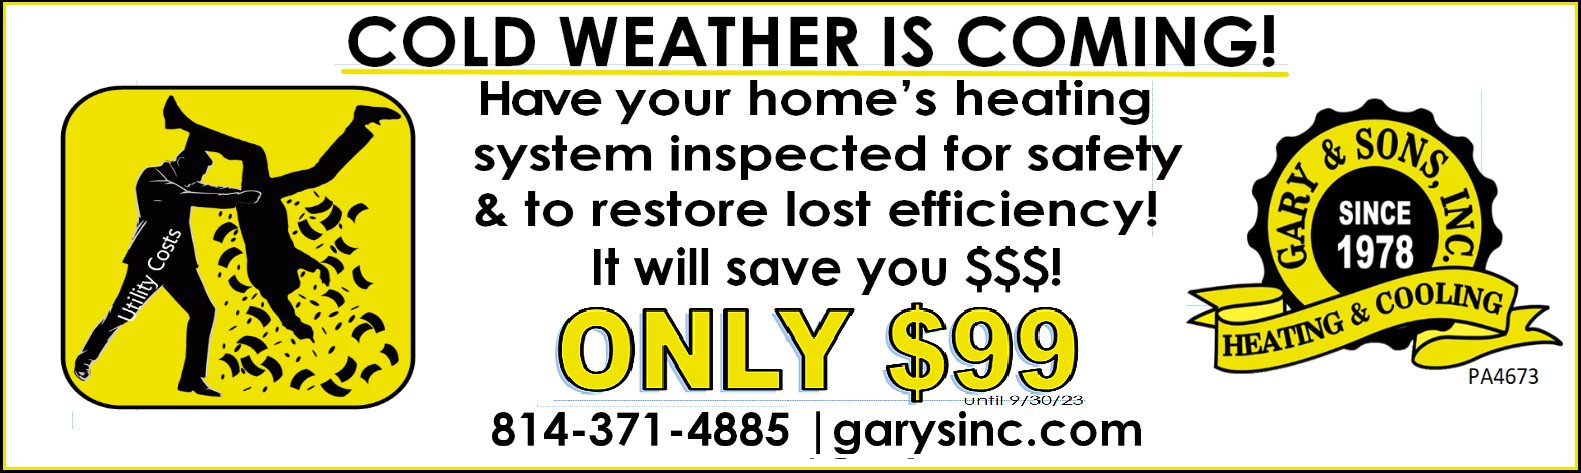 $99 Heating or Cooling Check Up > CLICK ME